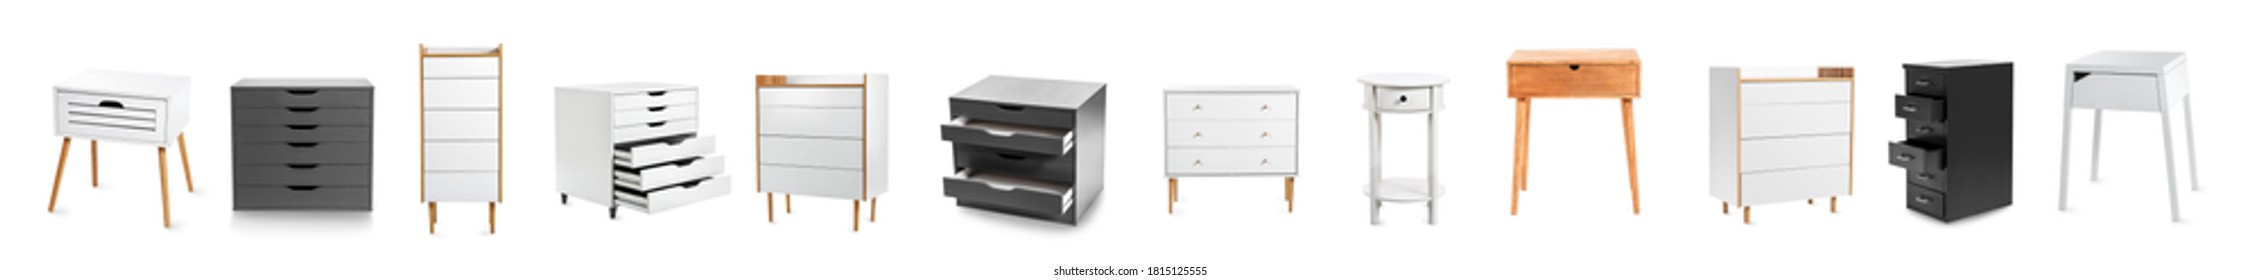 Set of different chest of drawers on white background